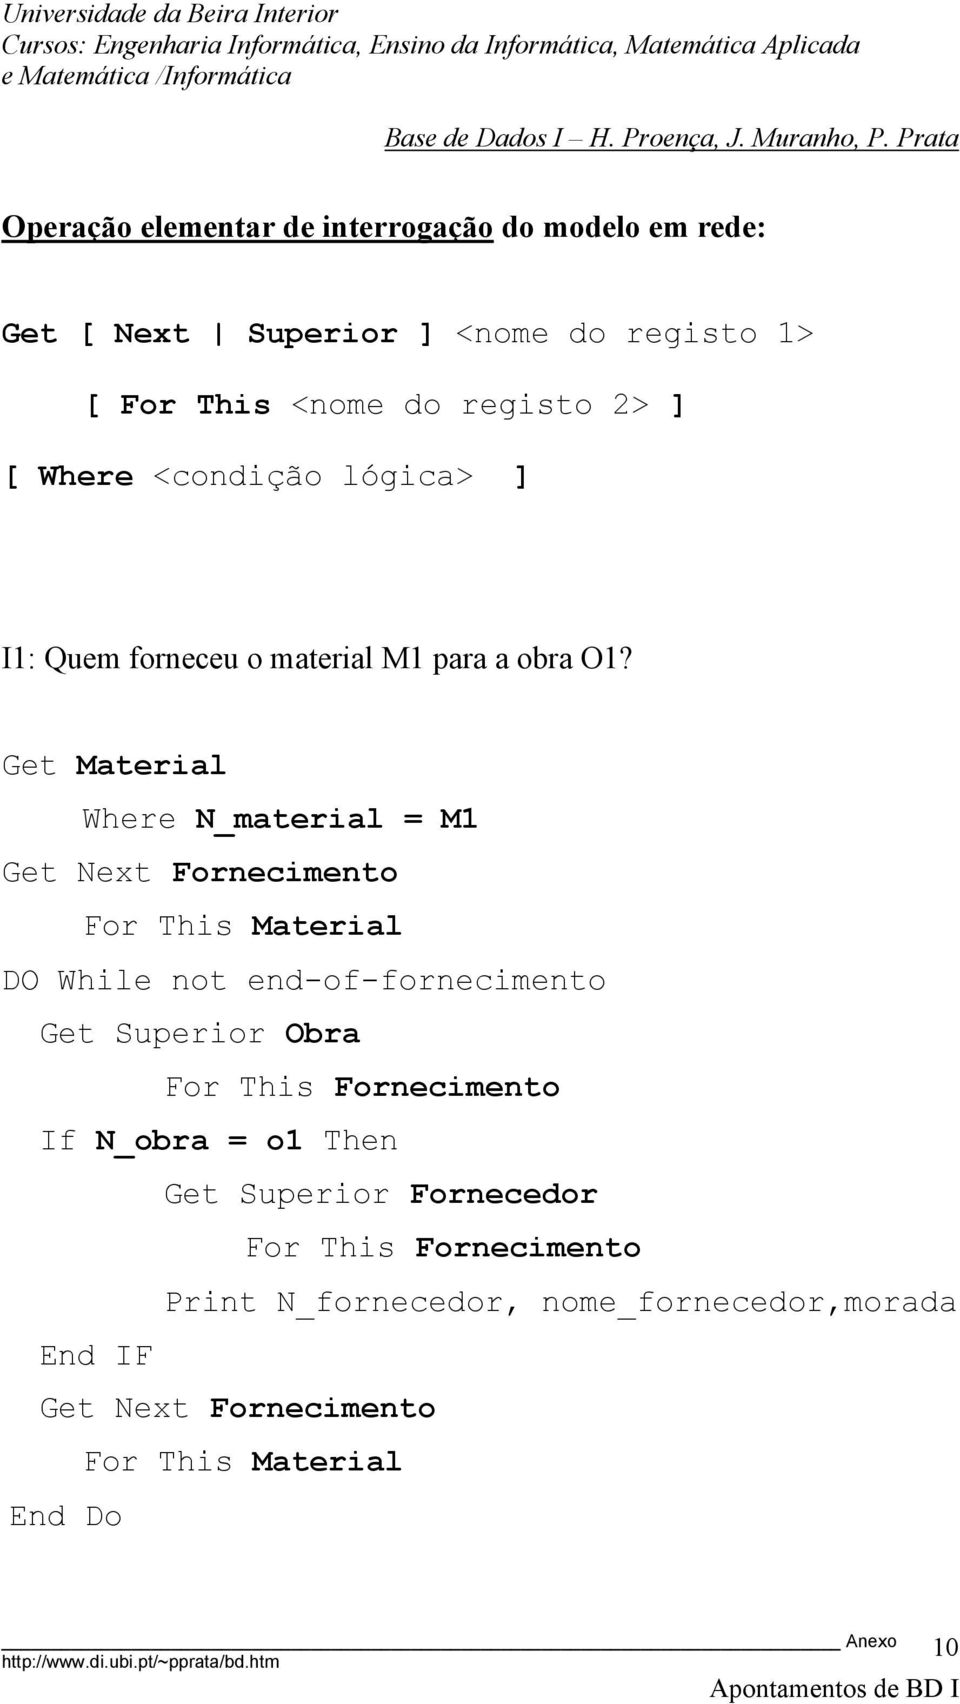 Get Material Where N_material = M1 Get Next Fornecimento For This Material DO While not end-of-fornecimento Get Superior Obra